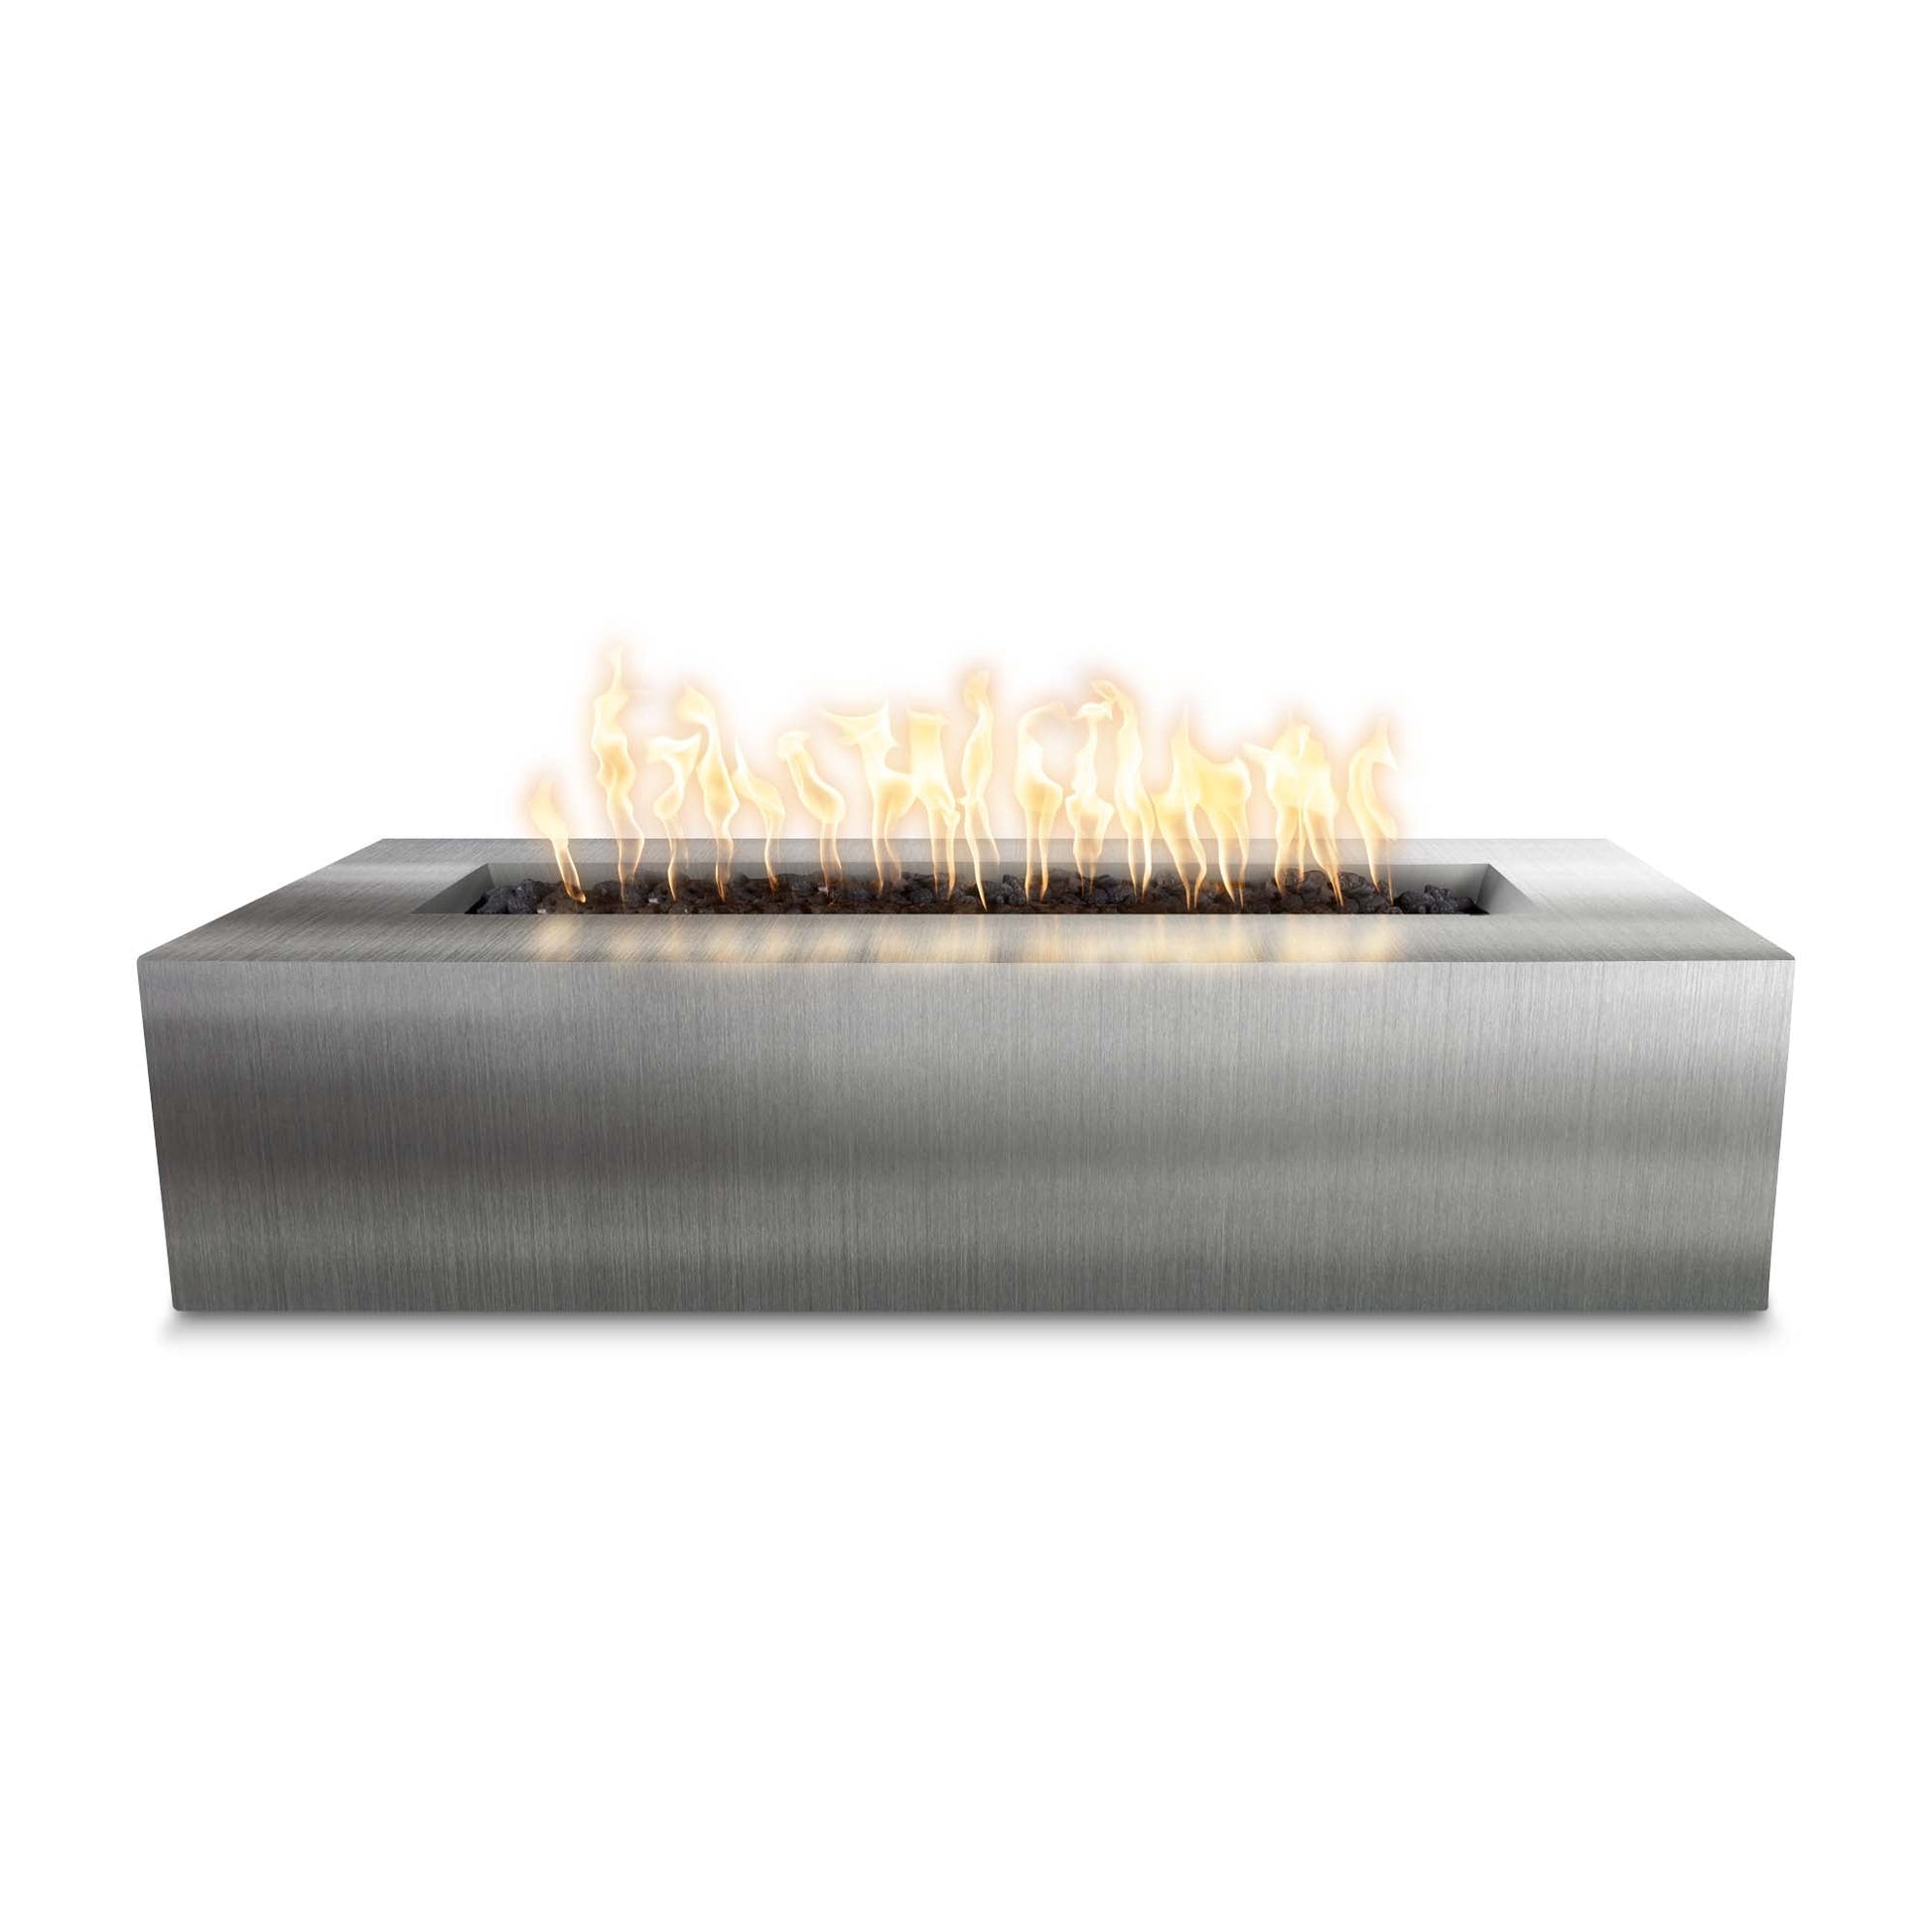 The Outdoor Plus Rectangular Regal 54" Stainless Steel Natural Gas Fire Pit with 110V Electronic Ignition